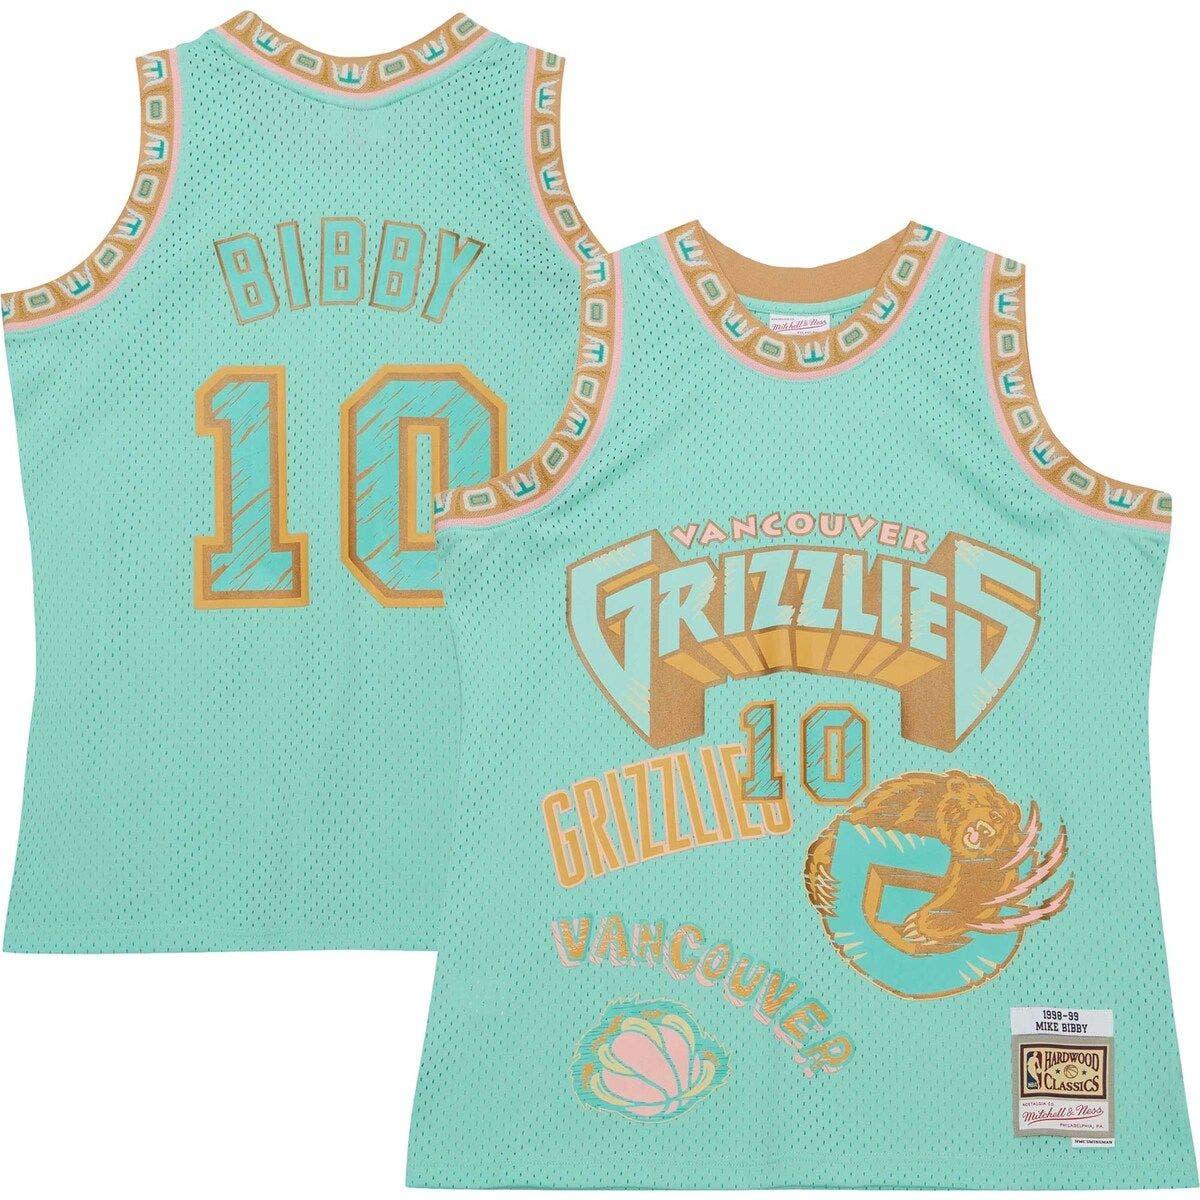 Vancouver Grizzlies 25th Anniversary Throwback Jerseys - Media Day Photos  Photo Gallery